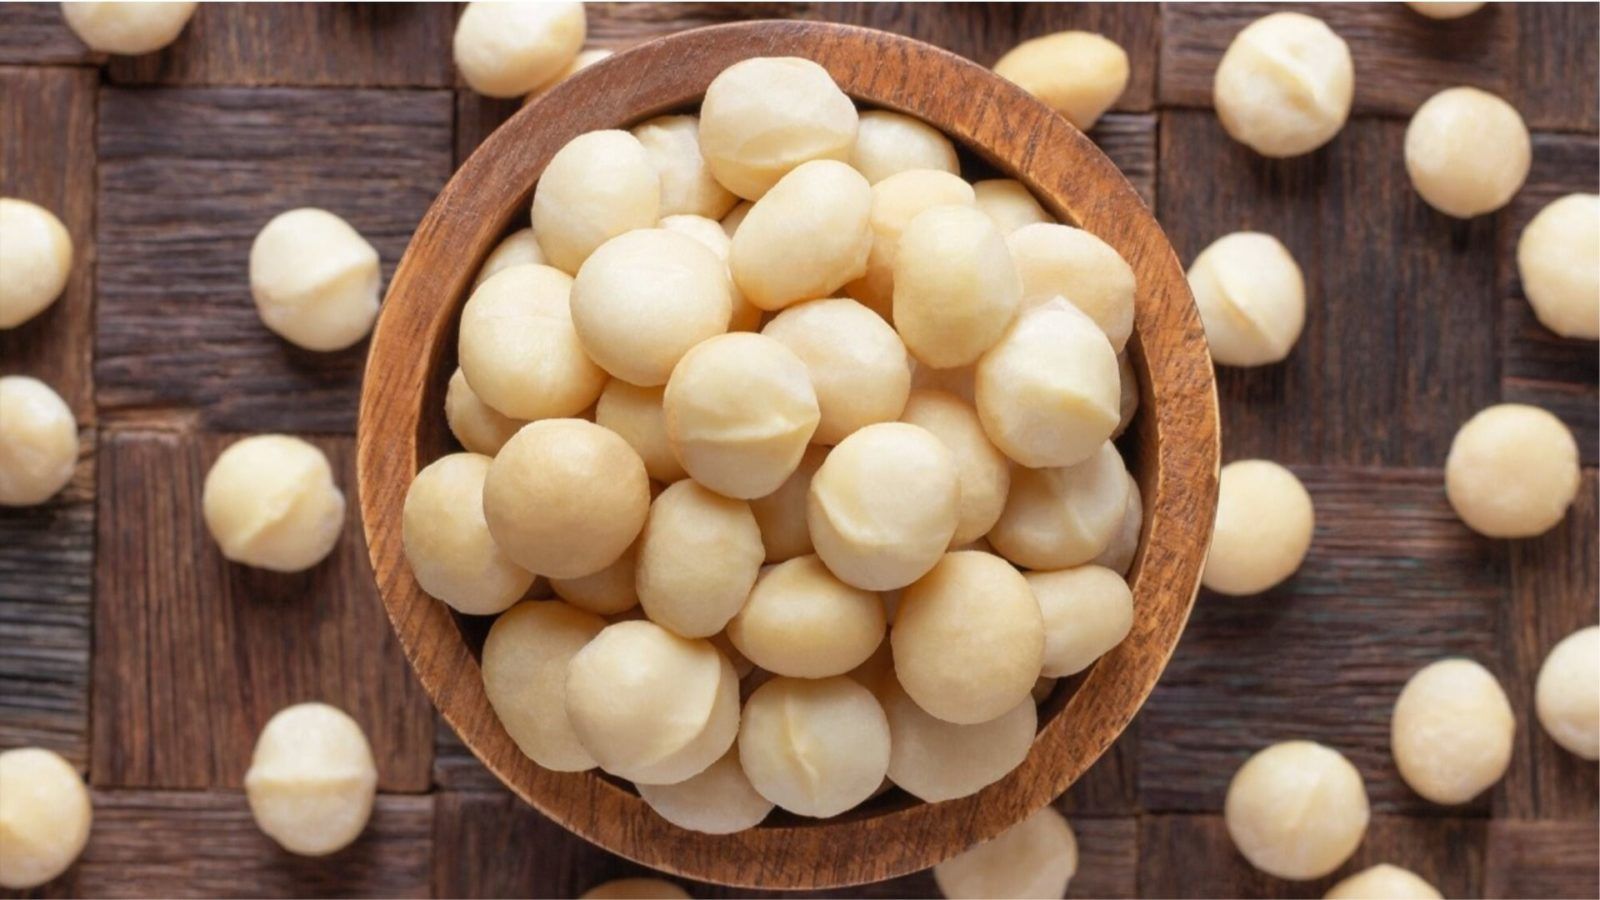 The health benefits of macadamia nuts and the most delicious ways to enjoy them